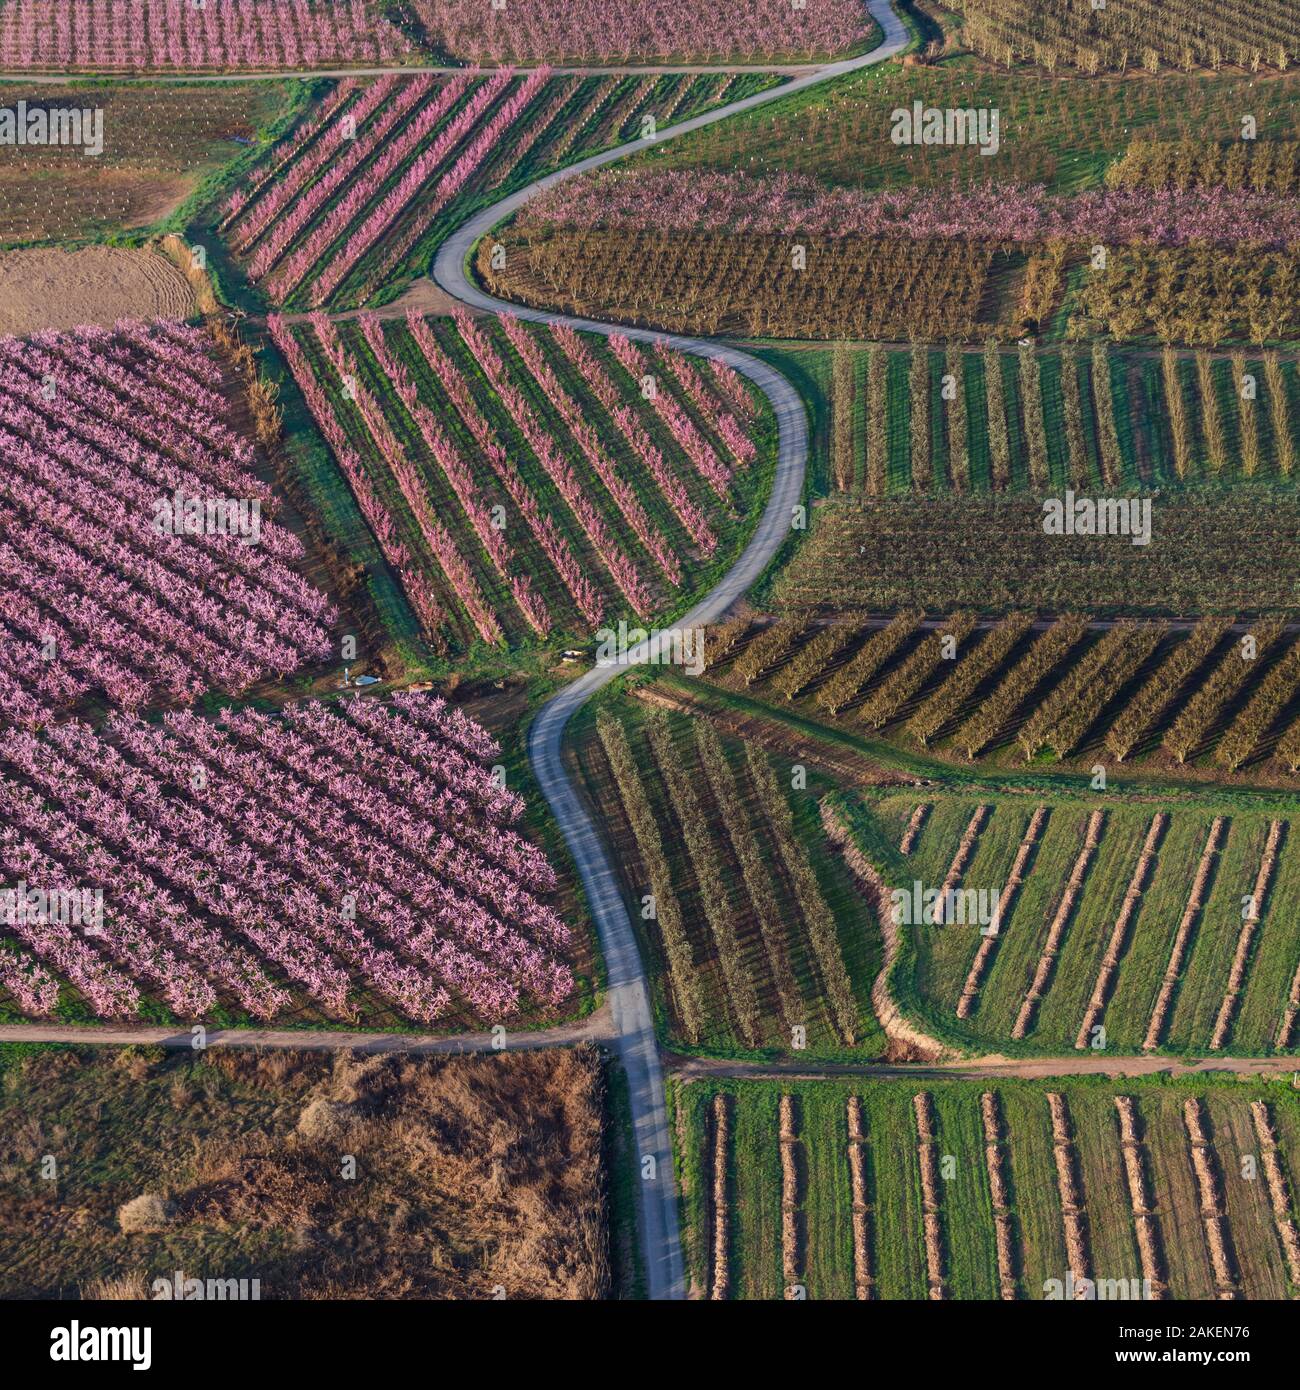 Aerial view of rwos of Peach trees (Prunus persica) in flower, Fruiturisme Tourism Experience, Lleida, Catalonia, Spain. March 2018. Stock Photo